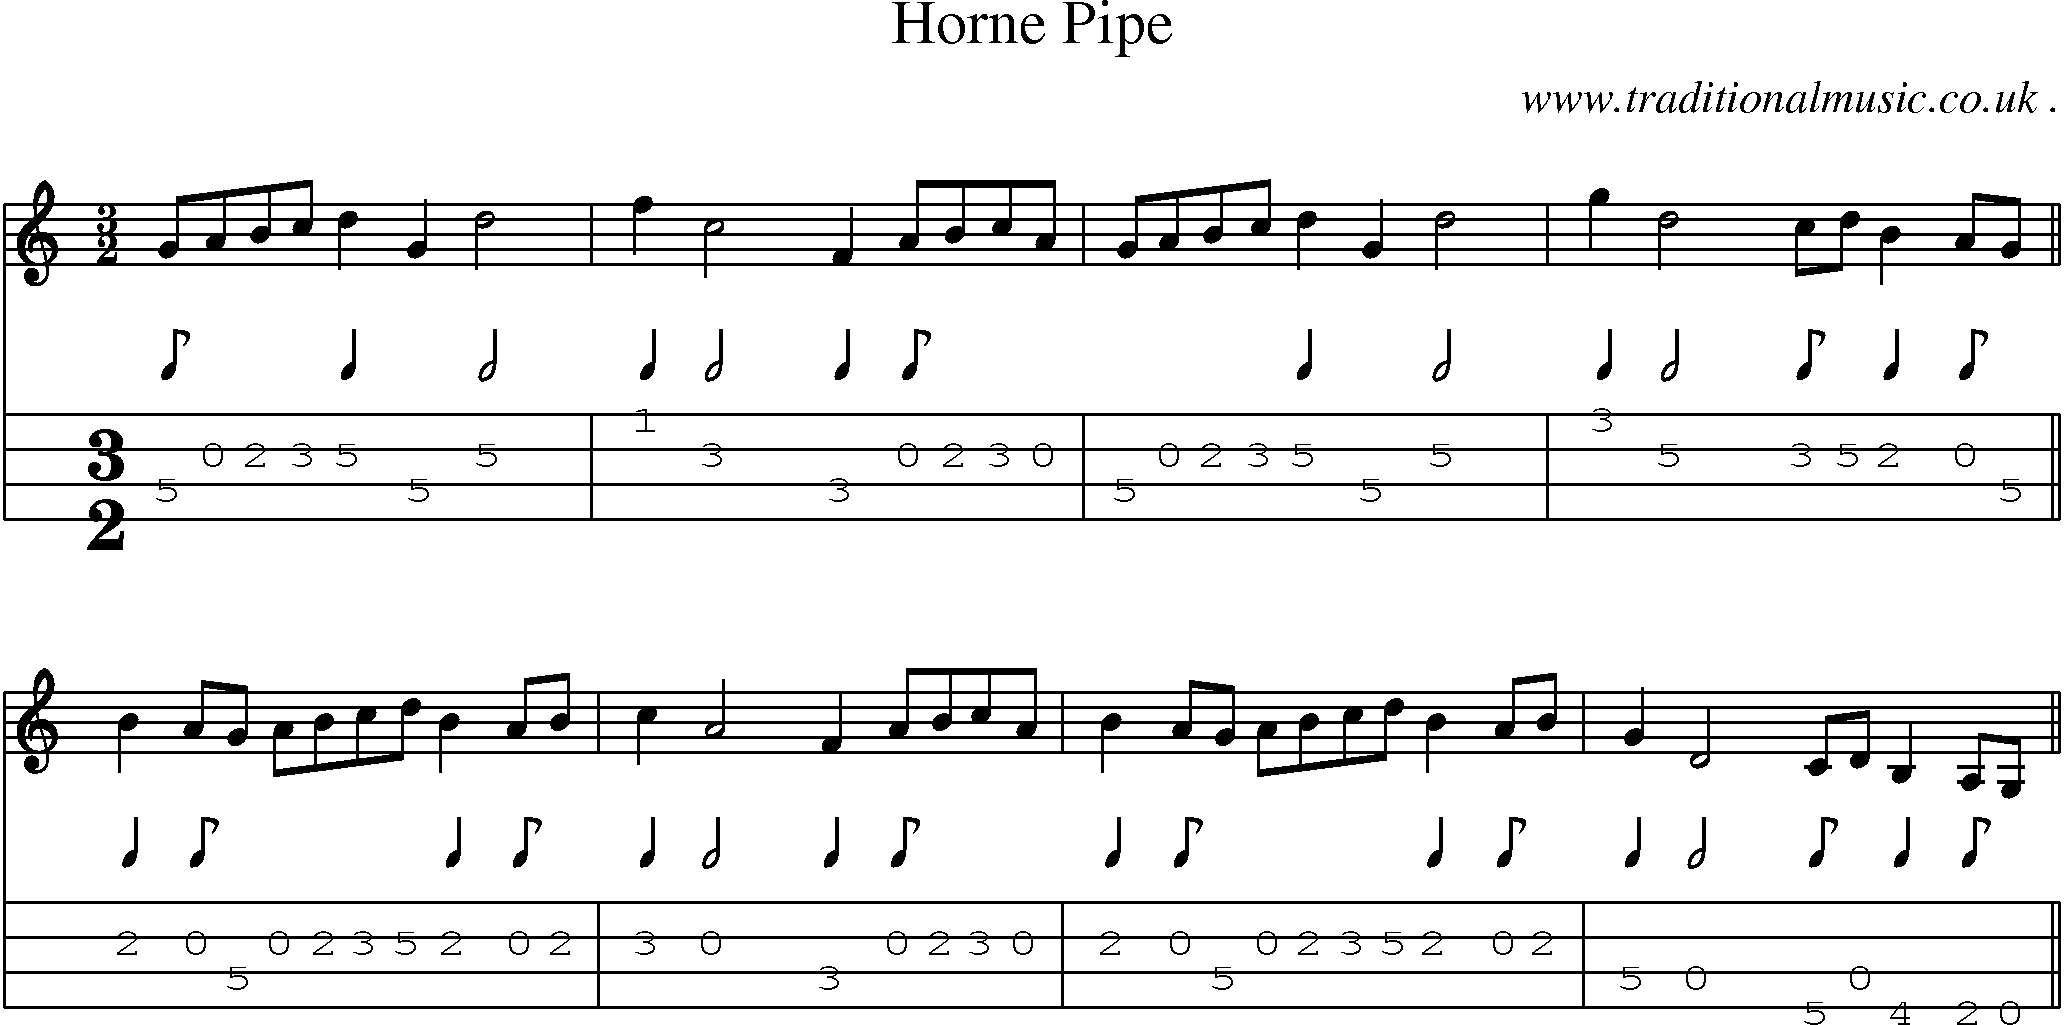 Sheet-music  score, Chords and Mandolin Tabs for Horne Pipe